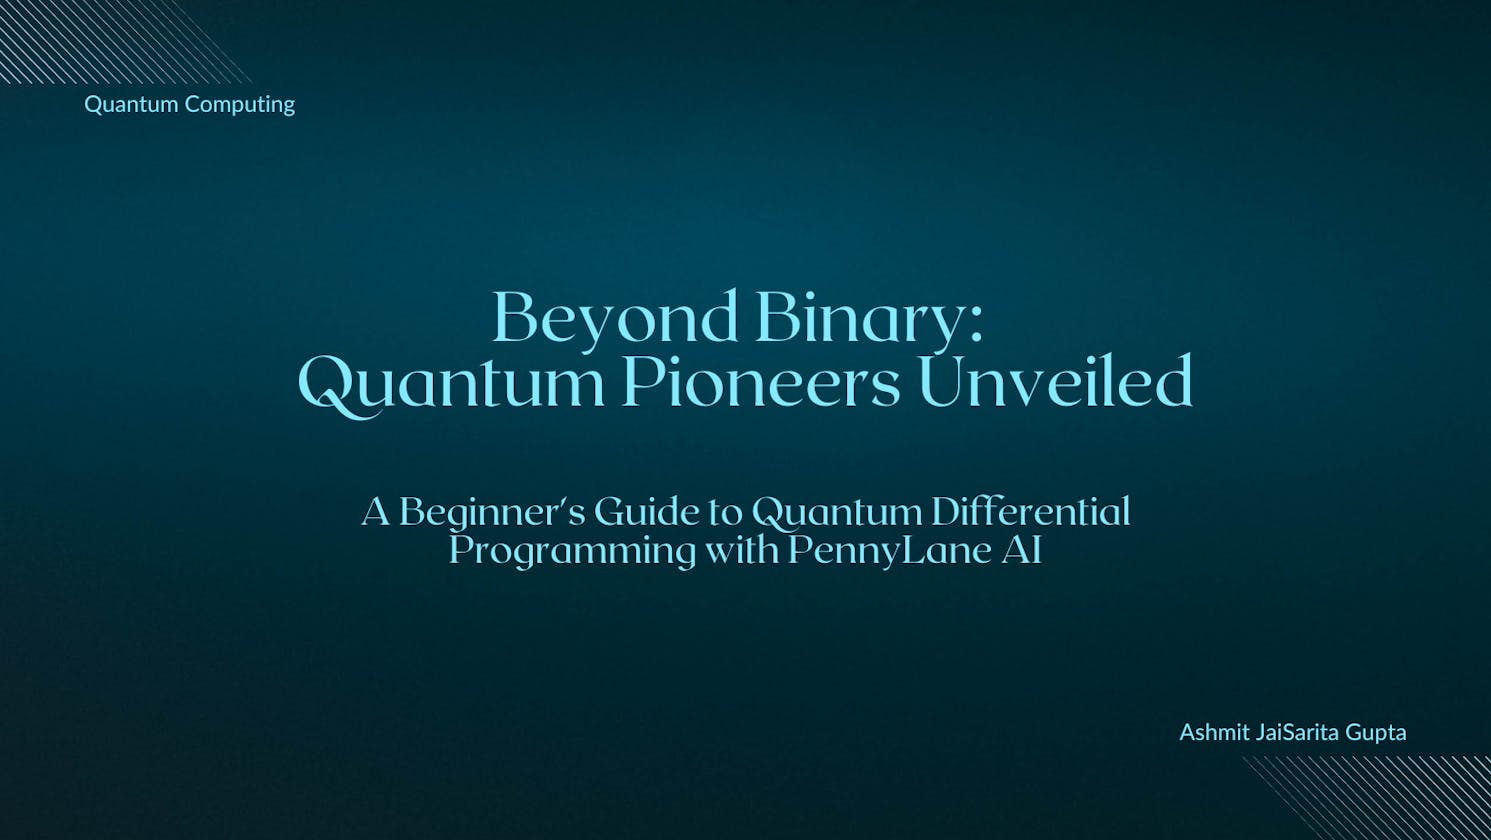 A Beginner's Guide to Quantum Differential Programming with PennyLane AI